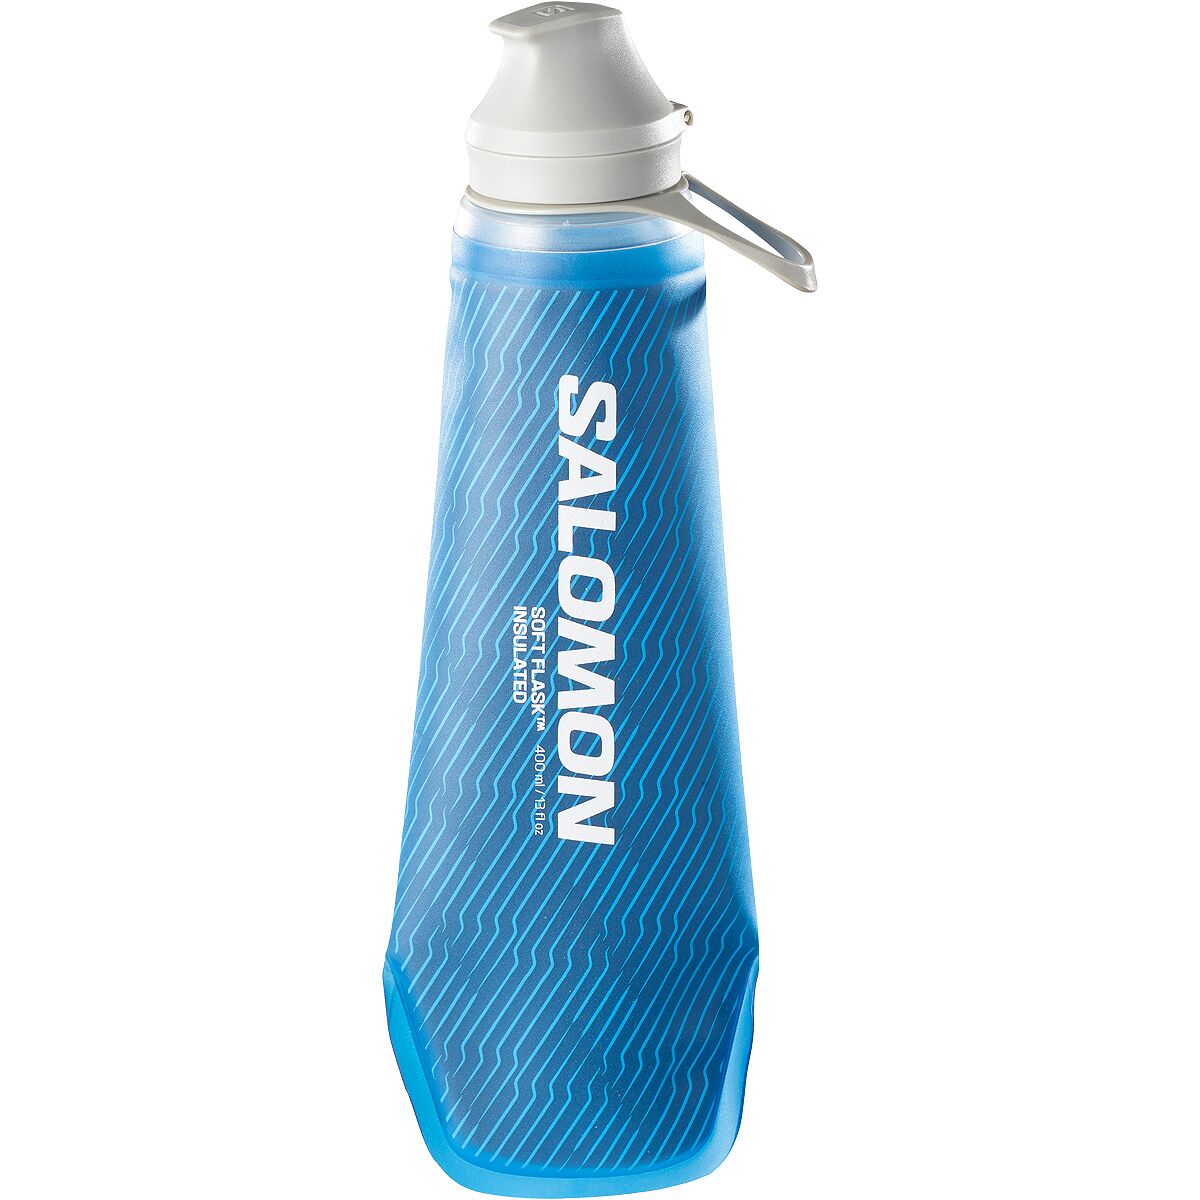 THERMOS 64 Ounce Foam Insulated Hydration Bottle, Blue